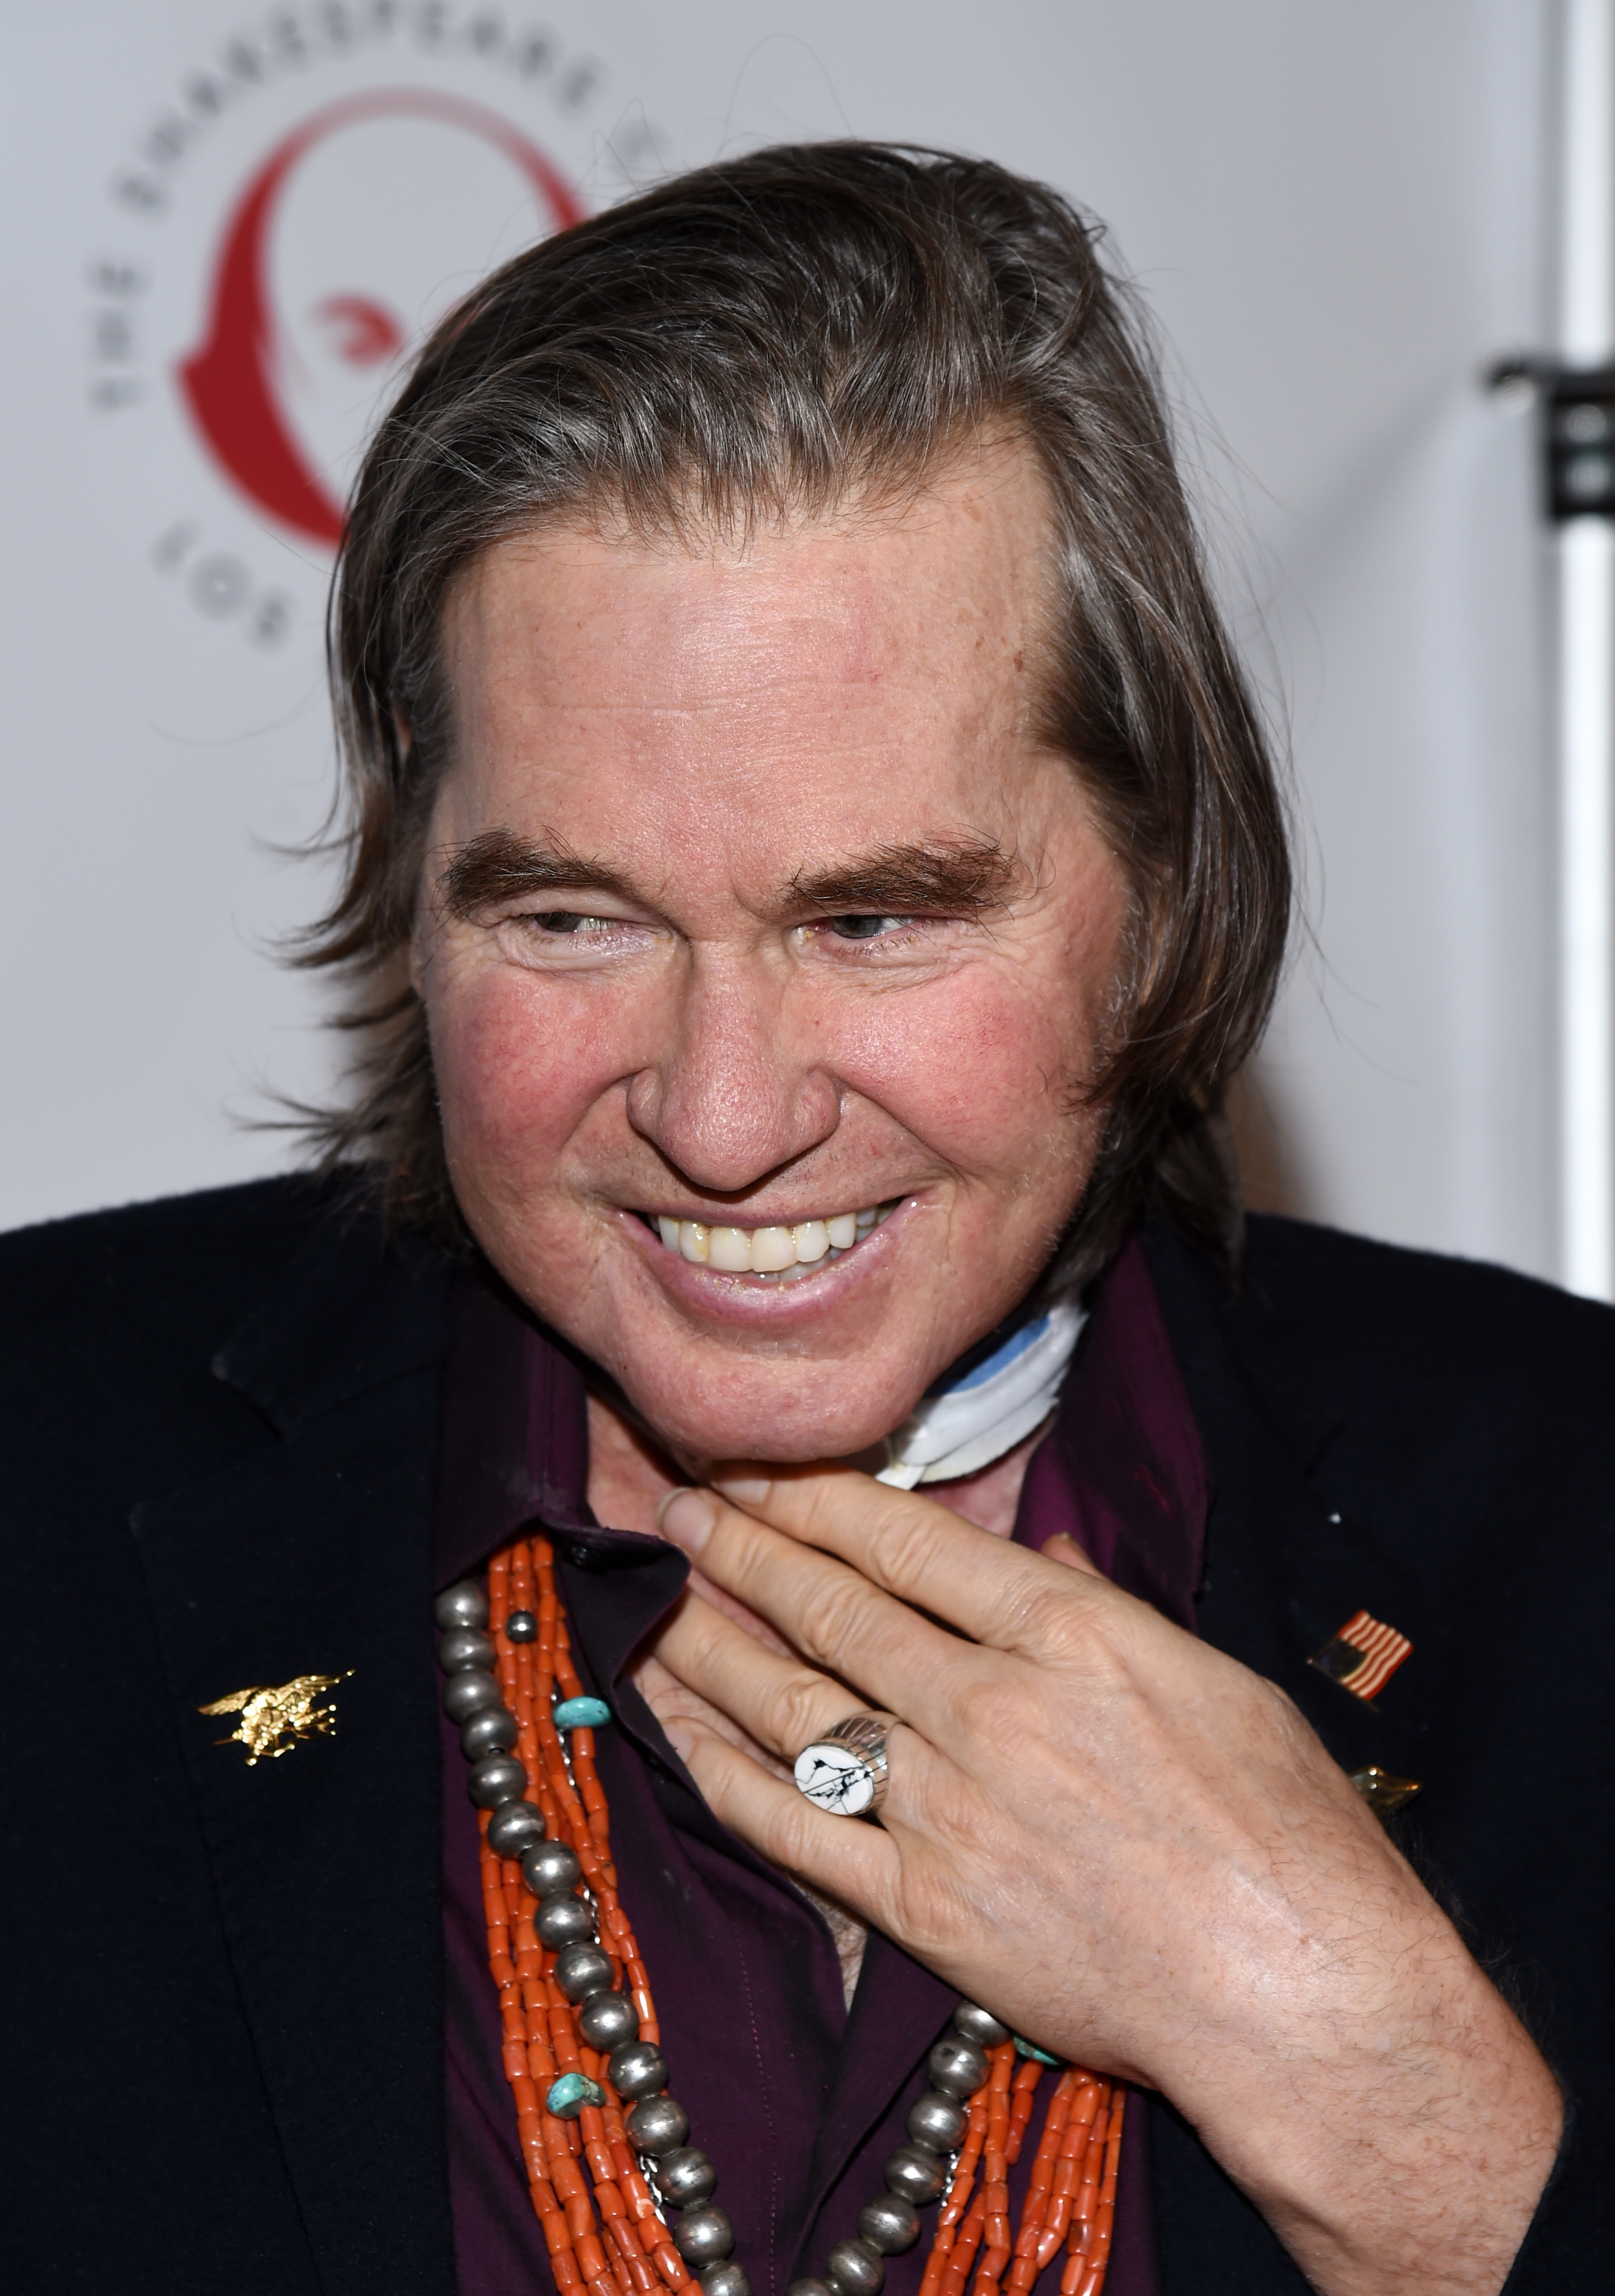 Val Kilmer at the Simply Shakespeare's Live Read of "The Merchant Of Venice" in 2019 | Source: Getty Images